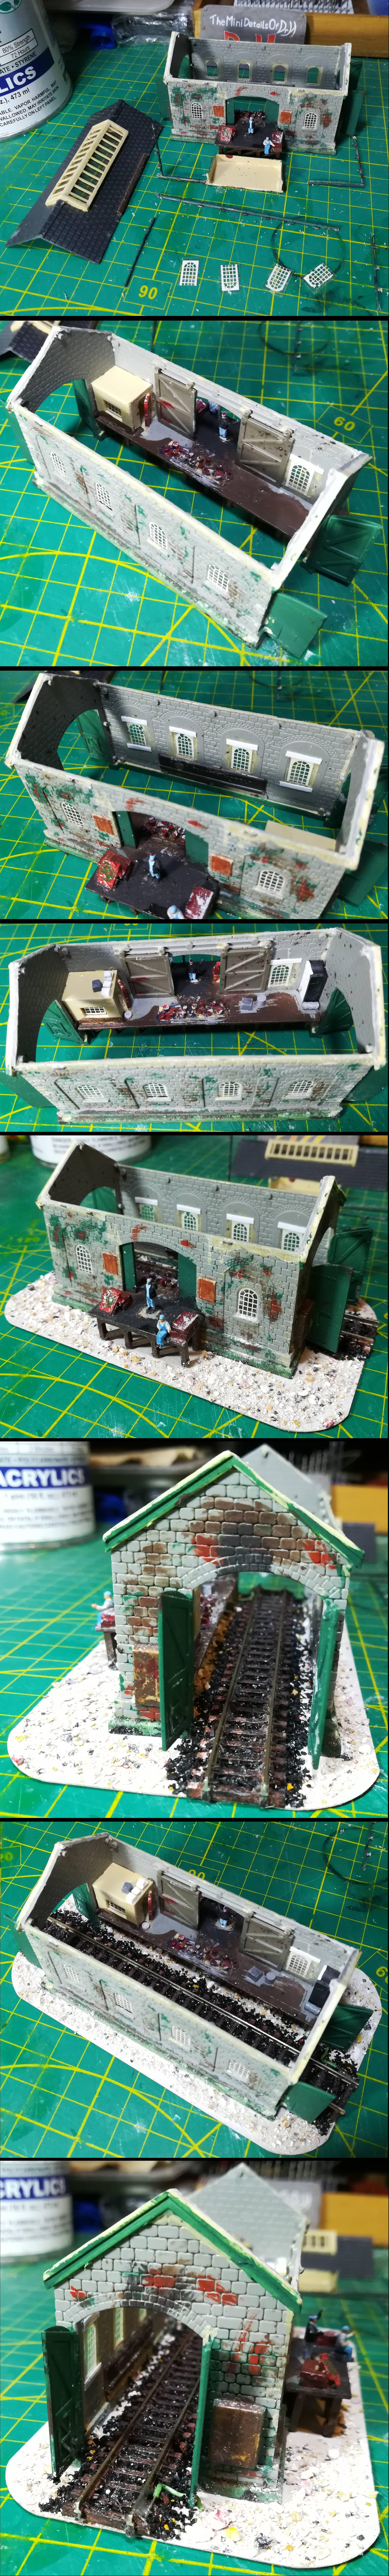 Loading shed wip 2